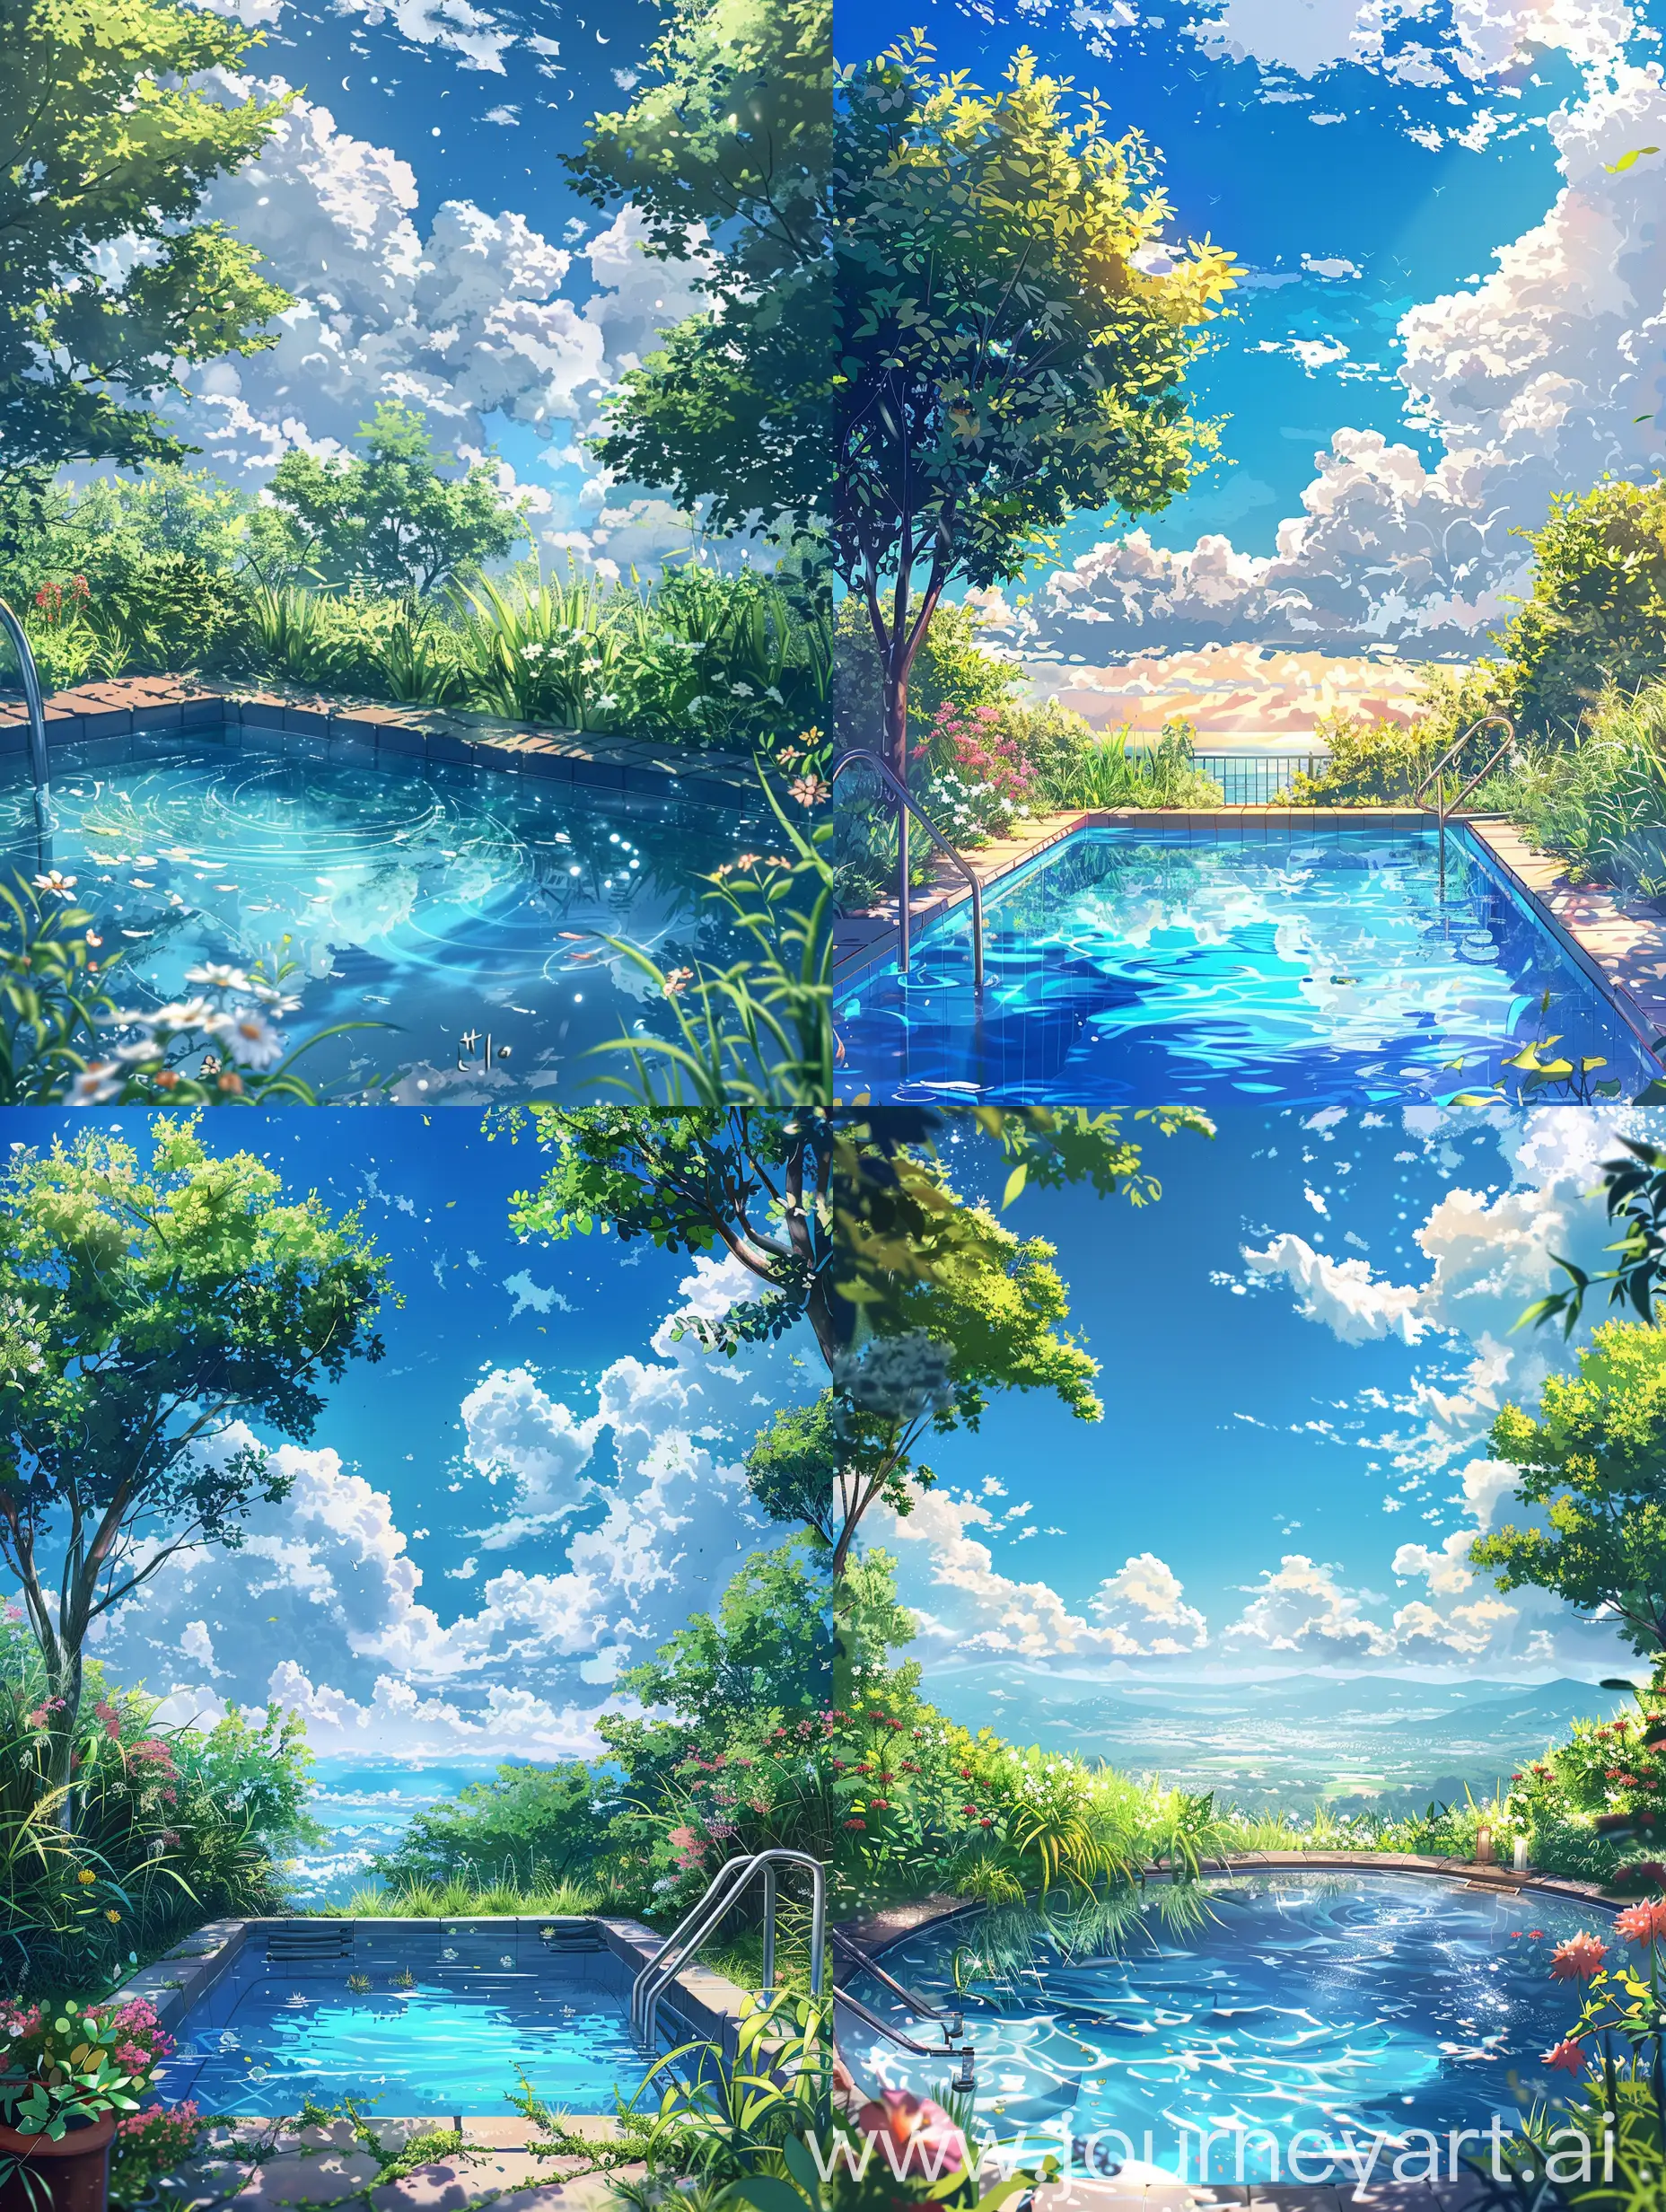 Serene-Anime-Style-Summer-Pool-Scene-with-Windy-Trees-and-Fluffy-Clouds